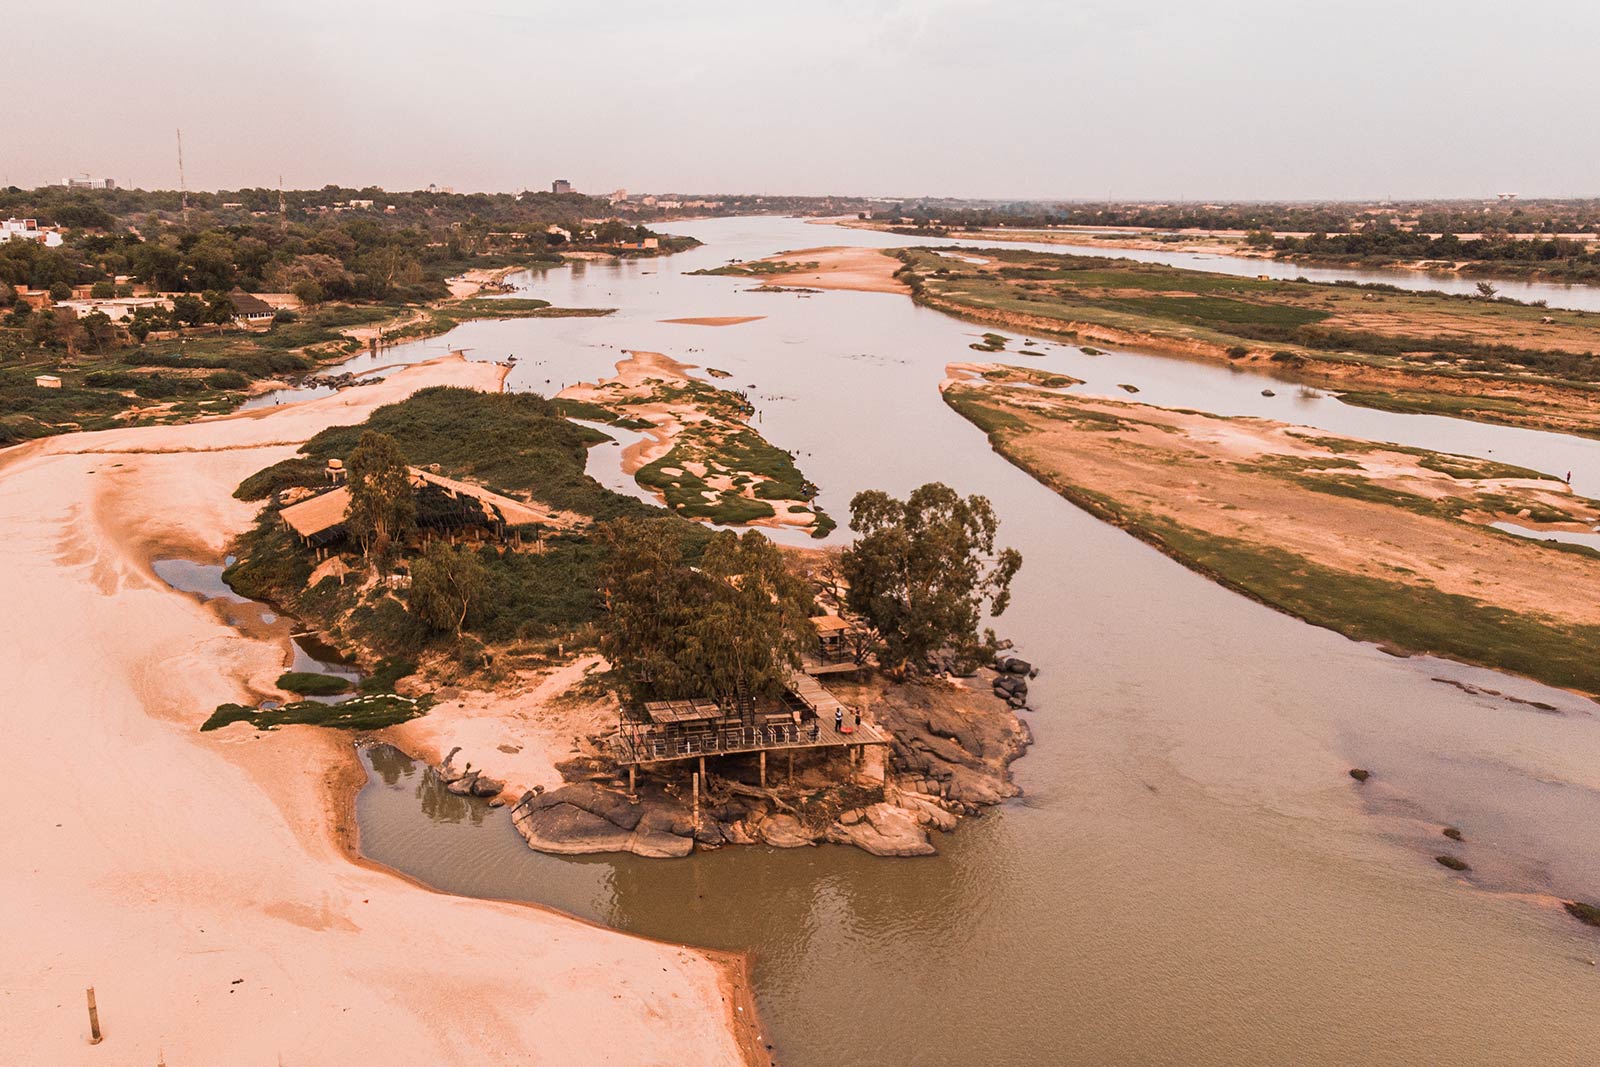 Birds eye view of Cape Banga and Niger River in Niger. Flying a drone in Niger